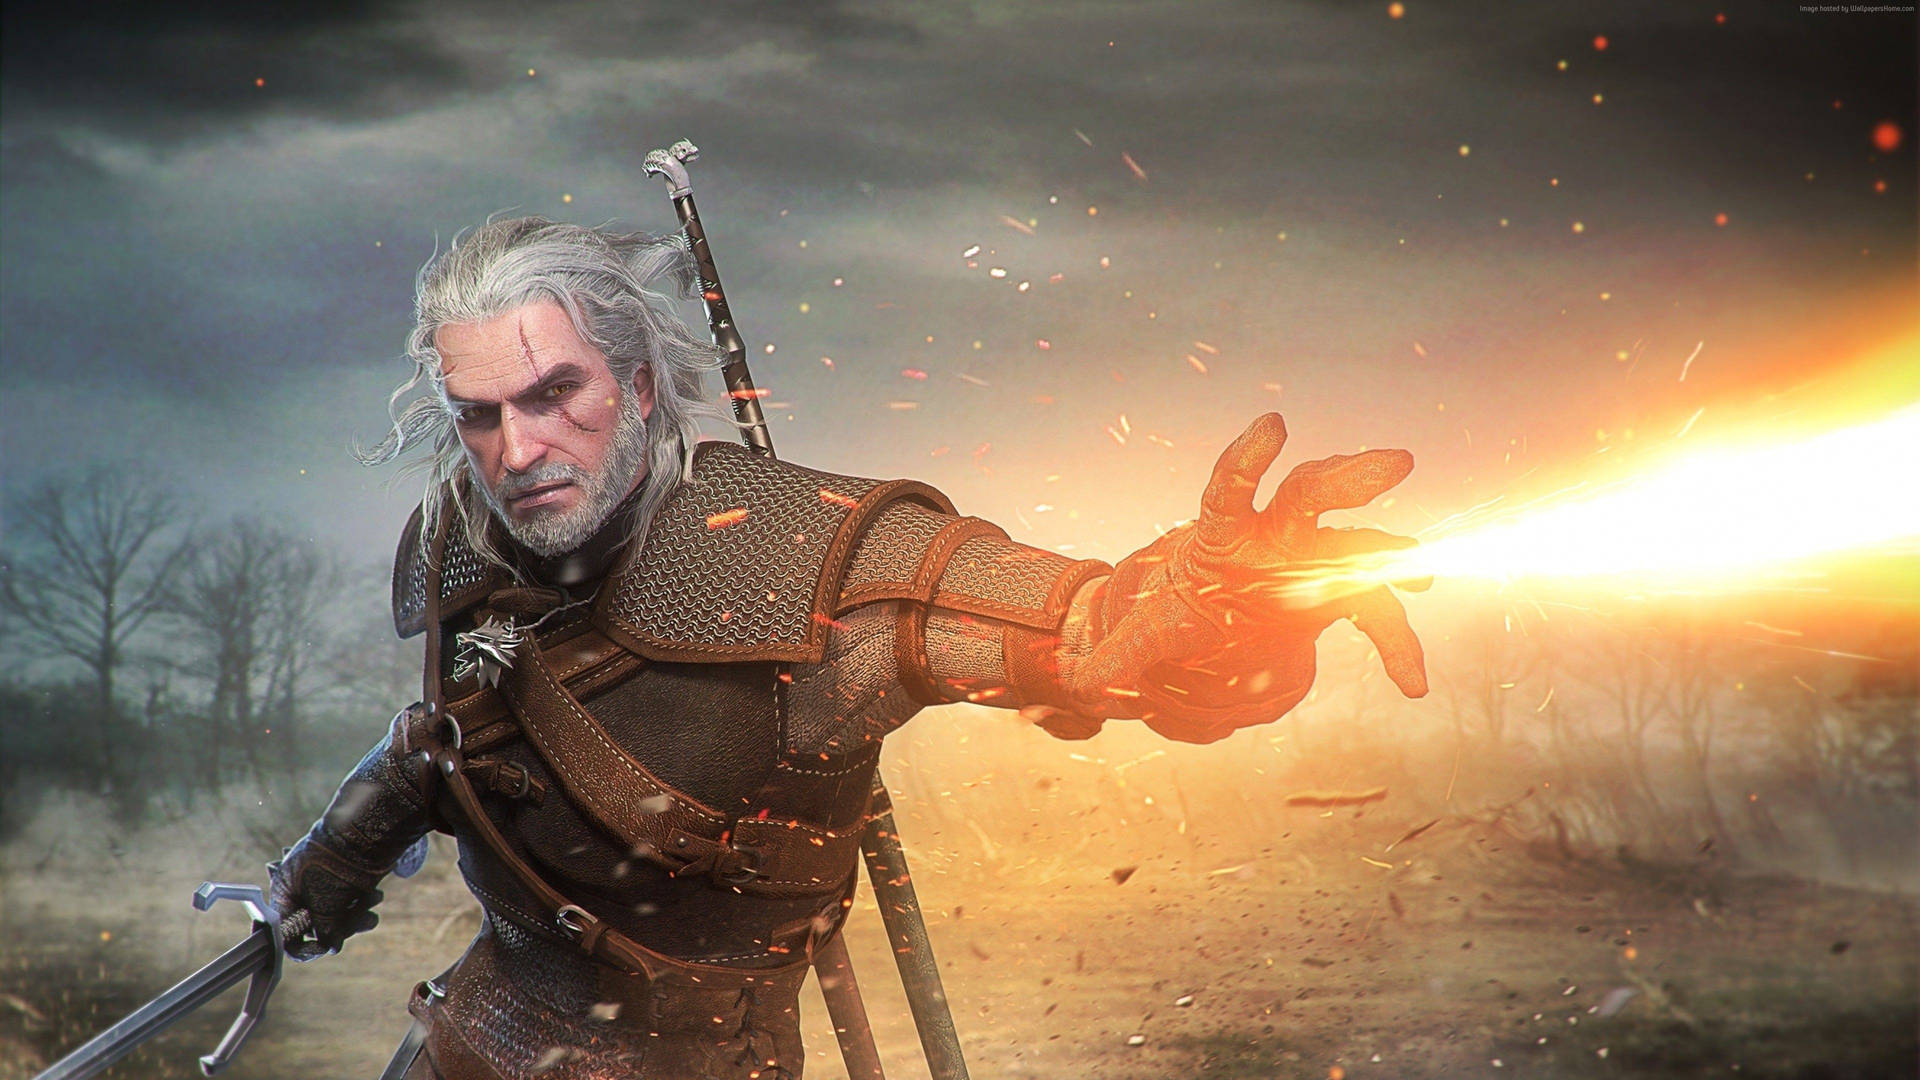 Battle monsters and experience epic adventures in The Witcher 3 Wallpaper